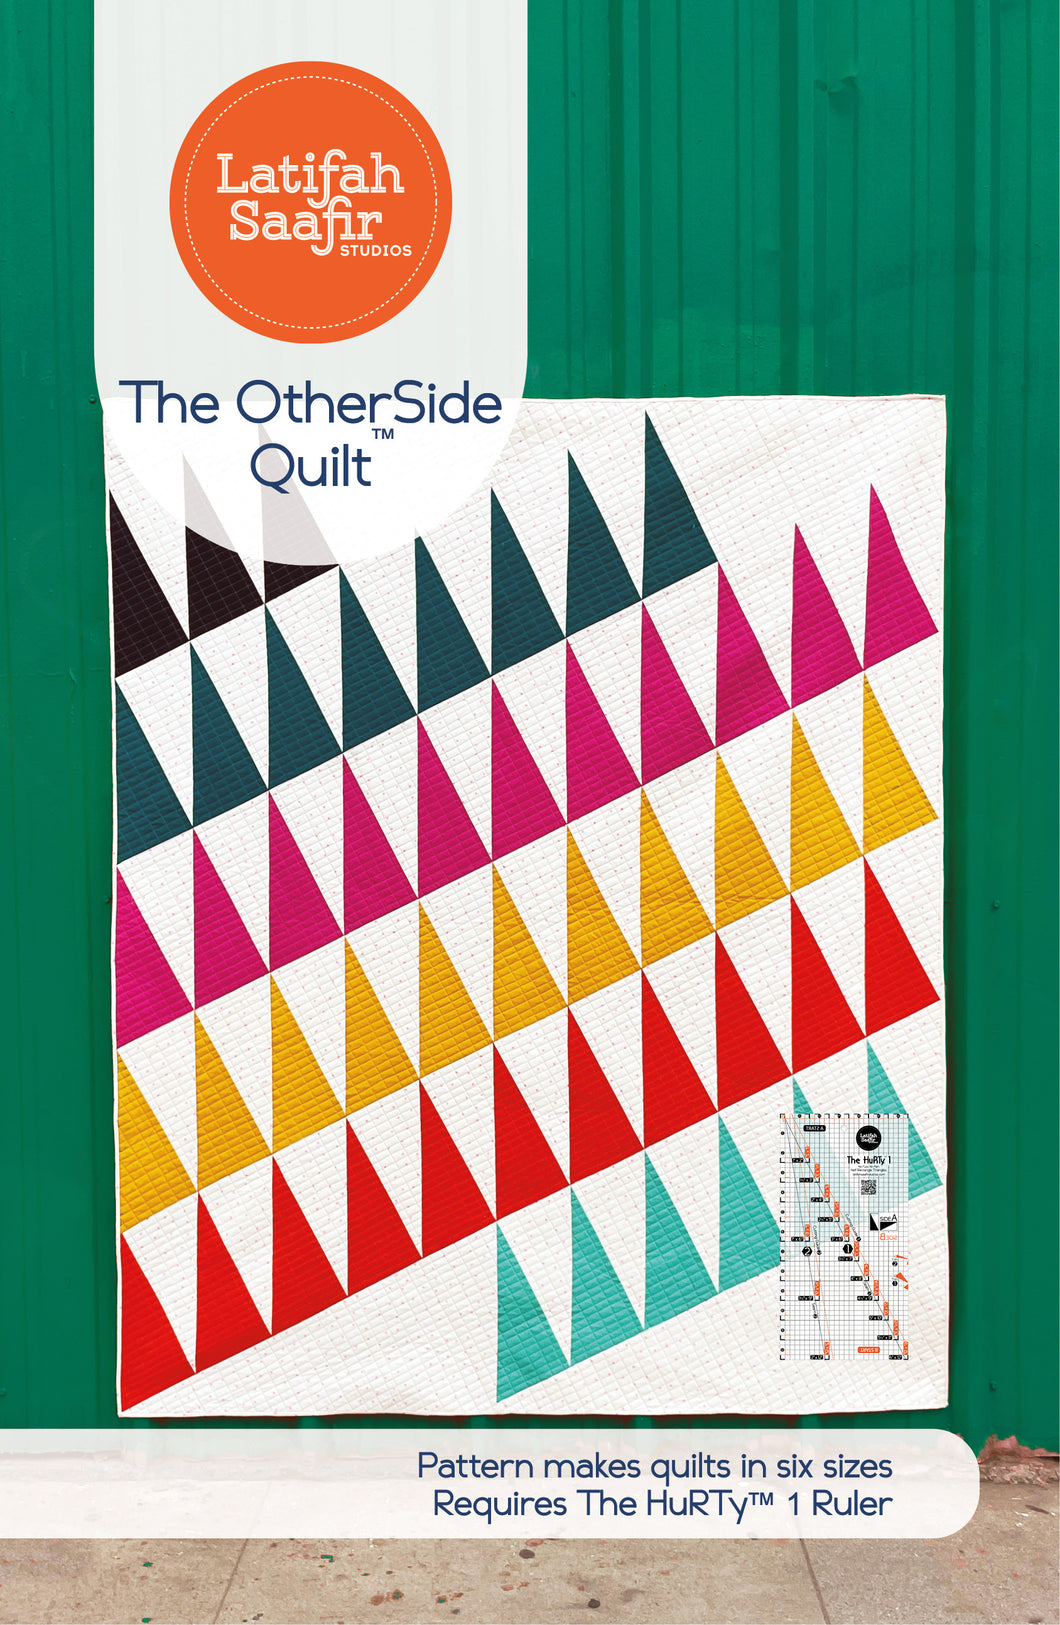 The OtherSide Quilt™